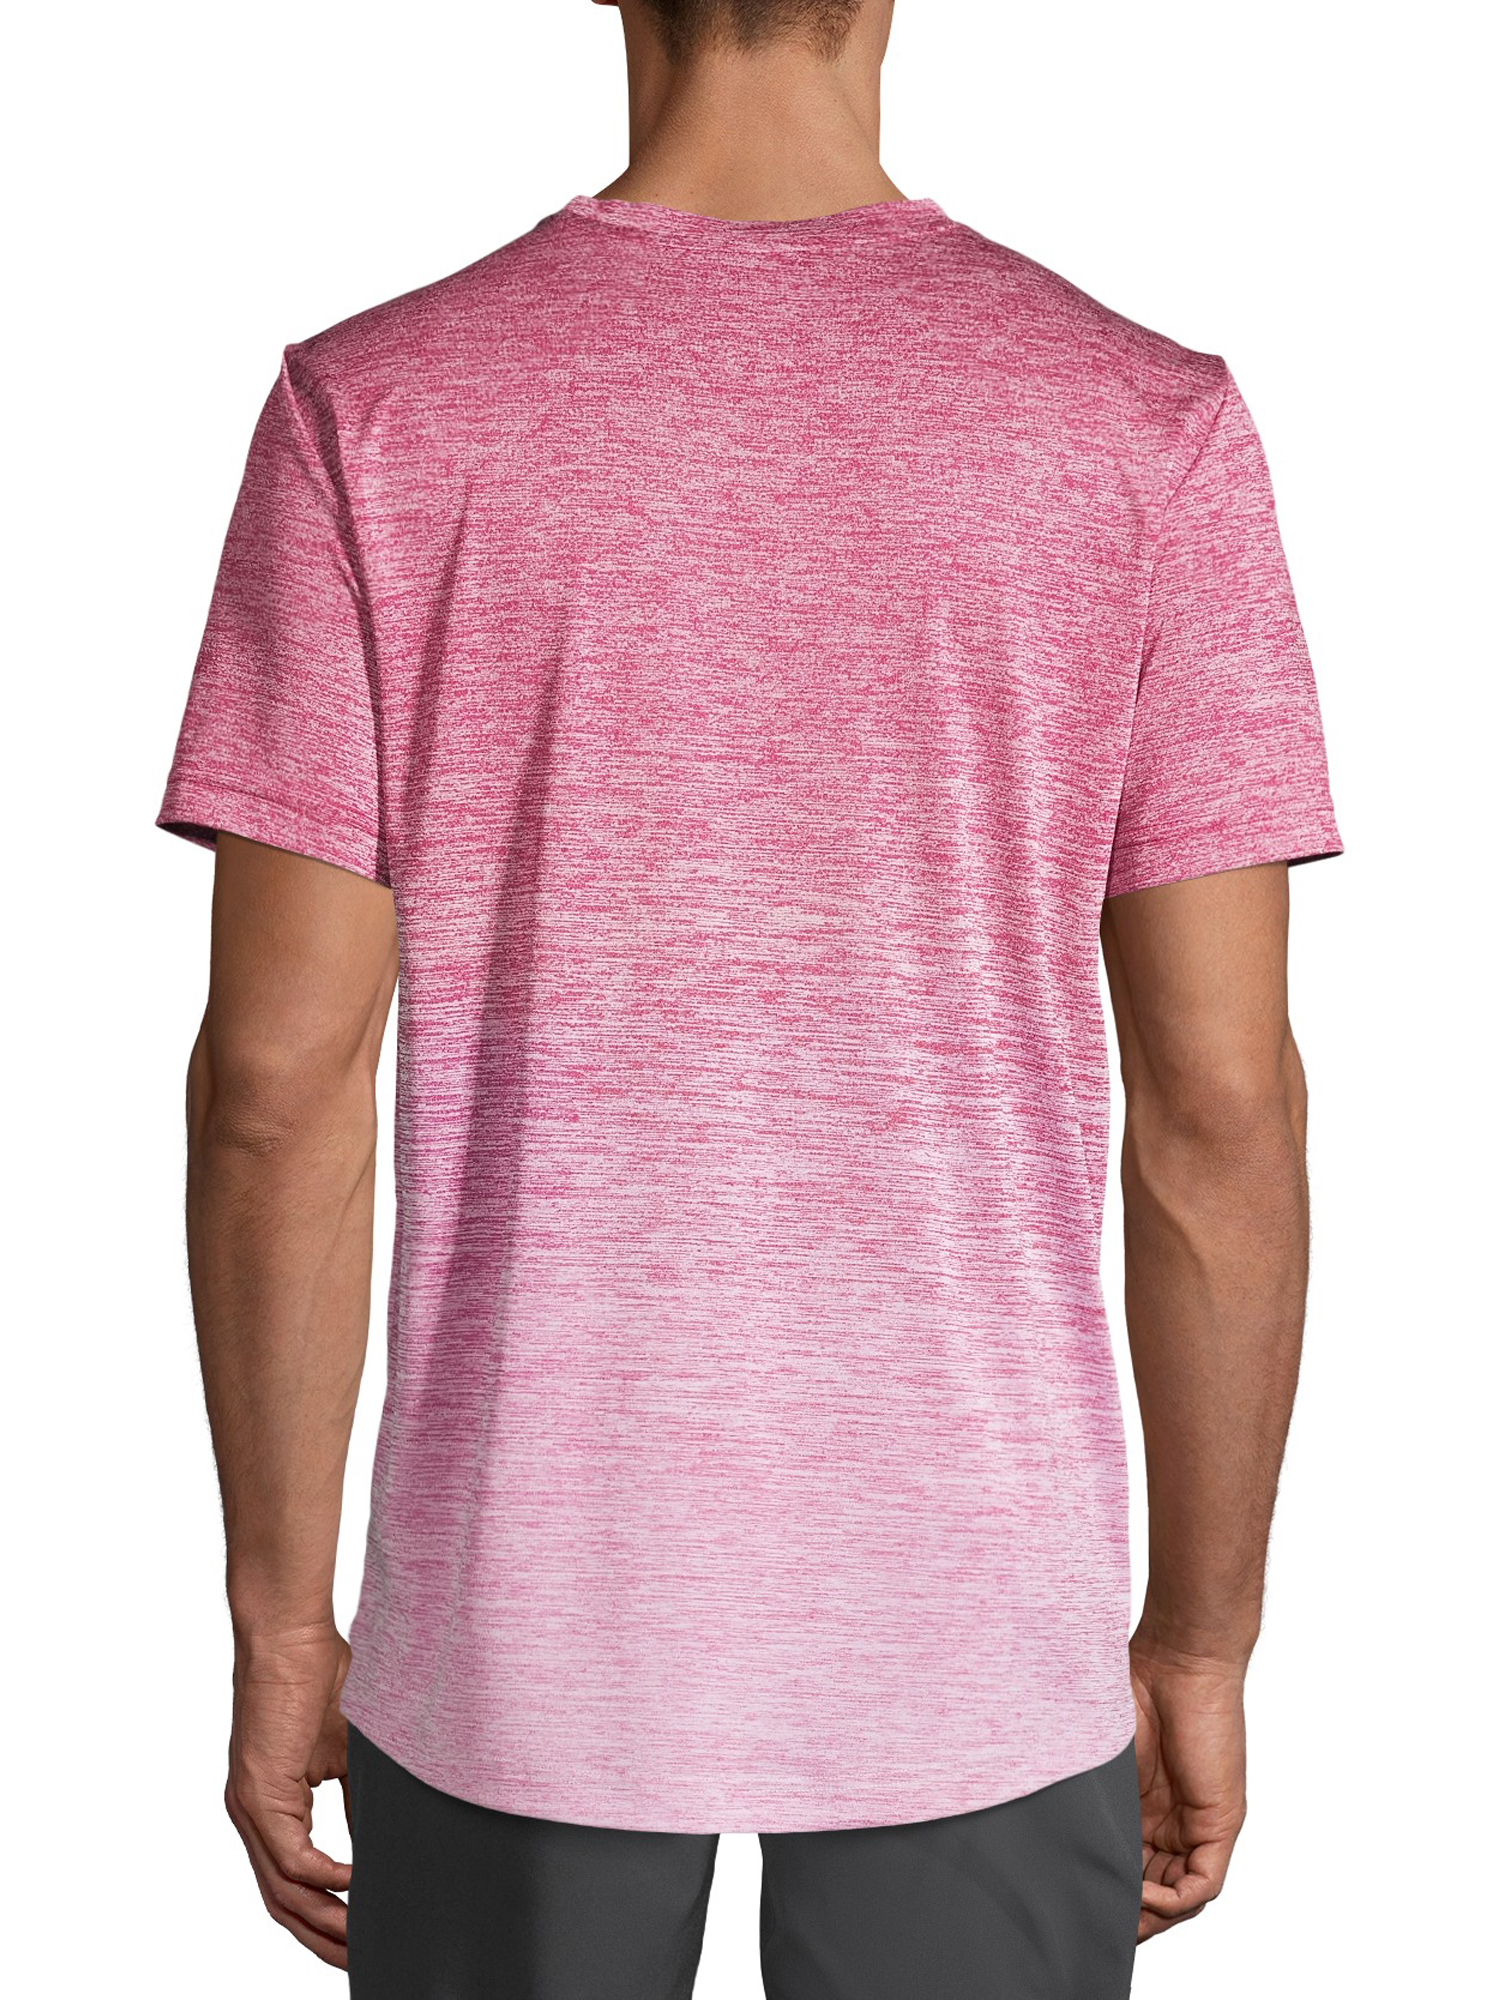 Russell Men's and Big Men's Ombre Performance Tee, up to Size 5XL - image 5 of 6